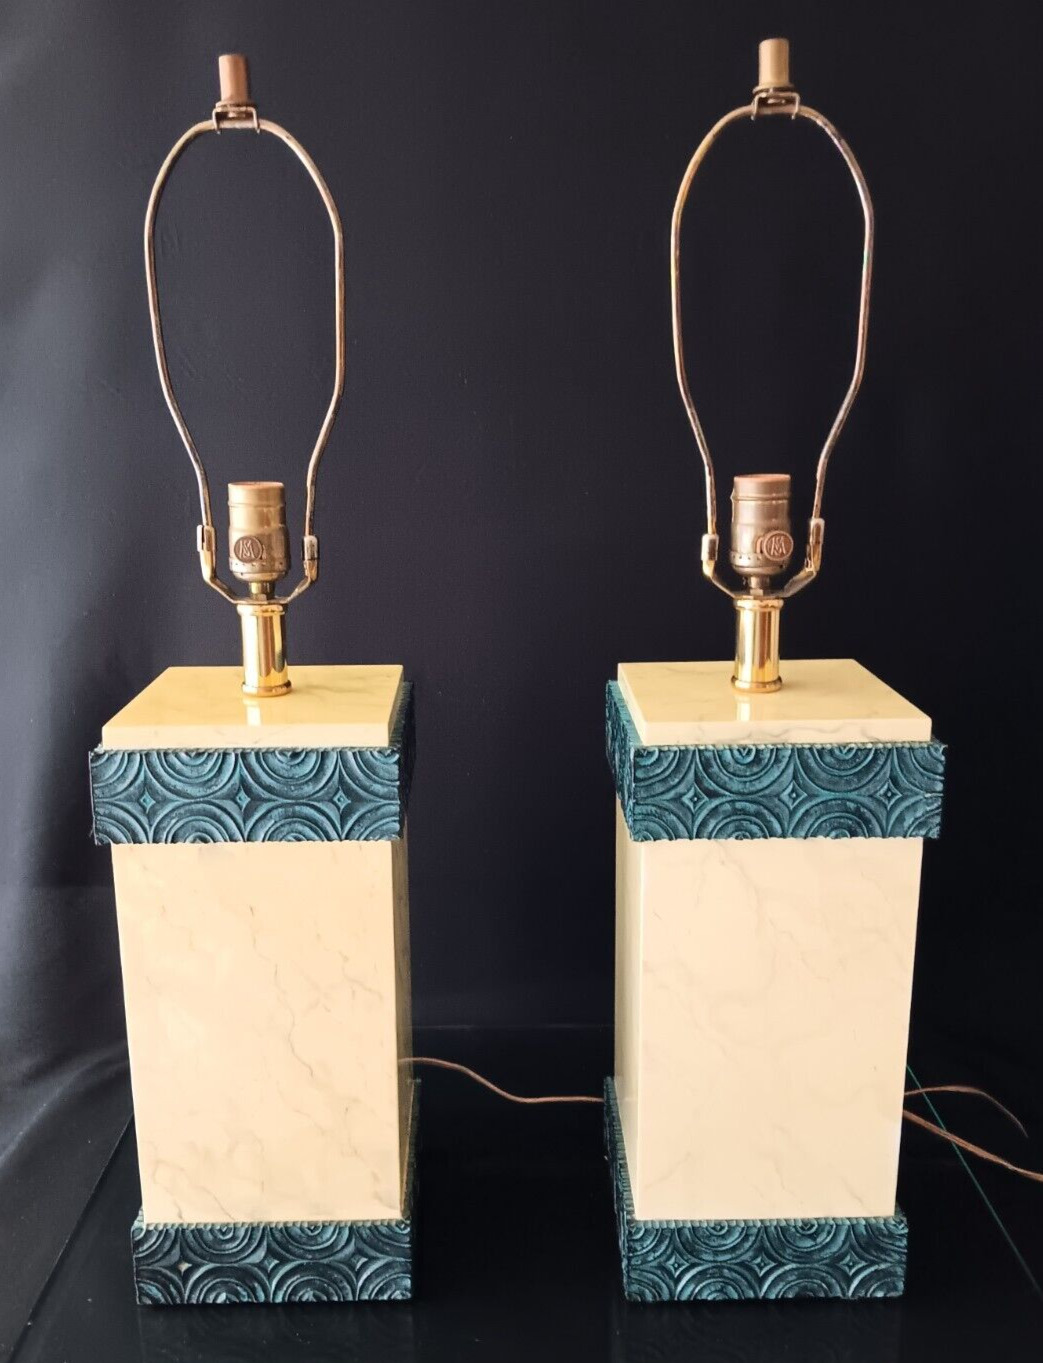 Maitland Smith Art Deco Lamps (Price is for the pair)